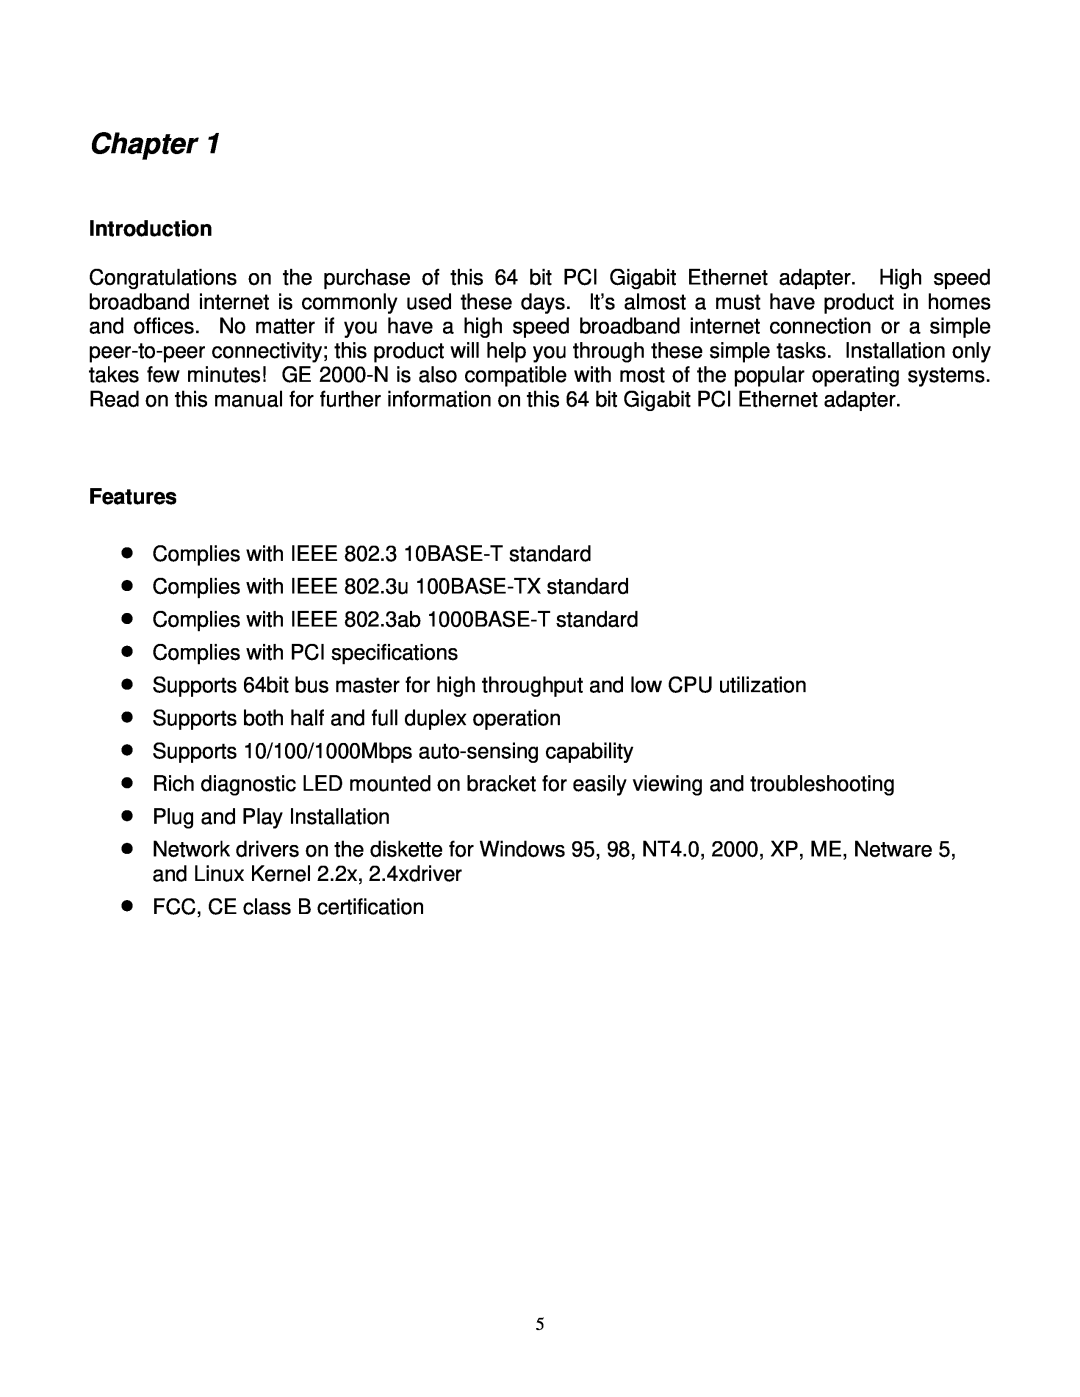 Gigabyte GE 2000-N user manual Chapter, Introduction, Features 